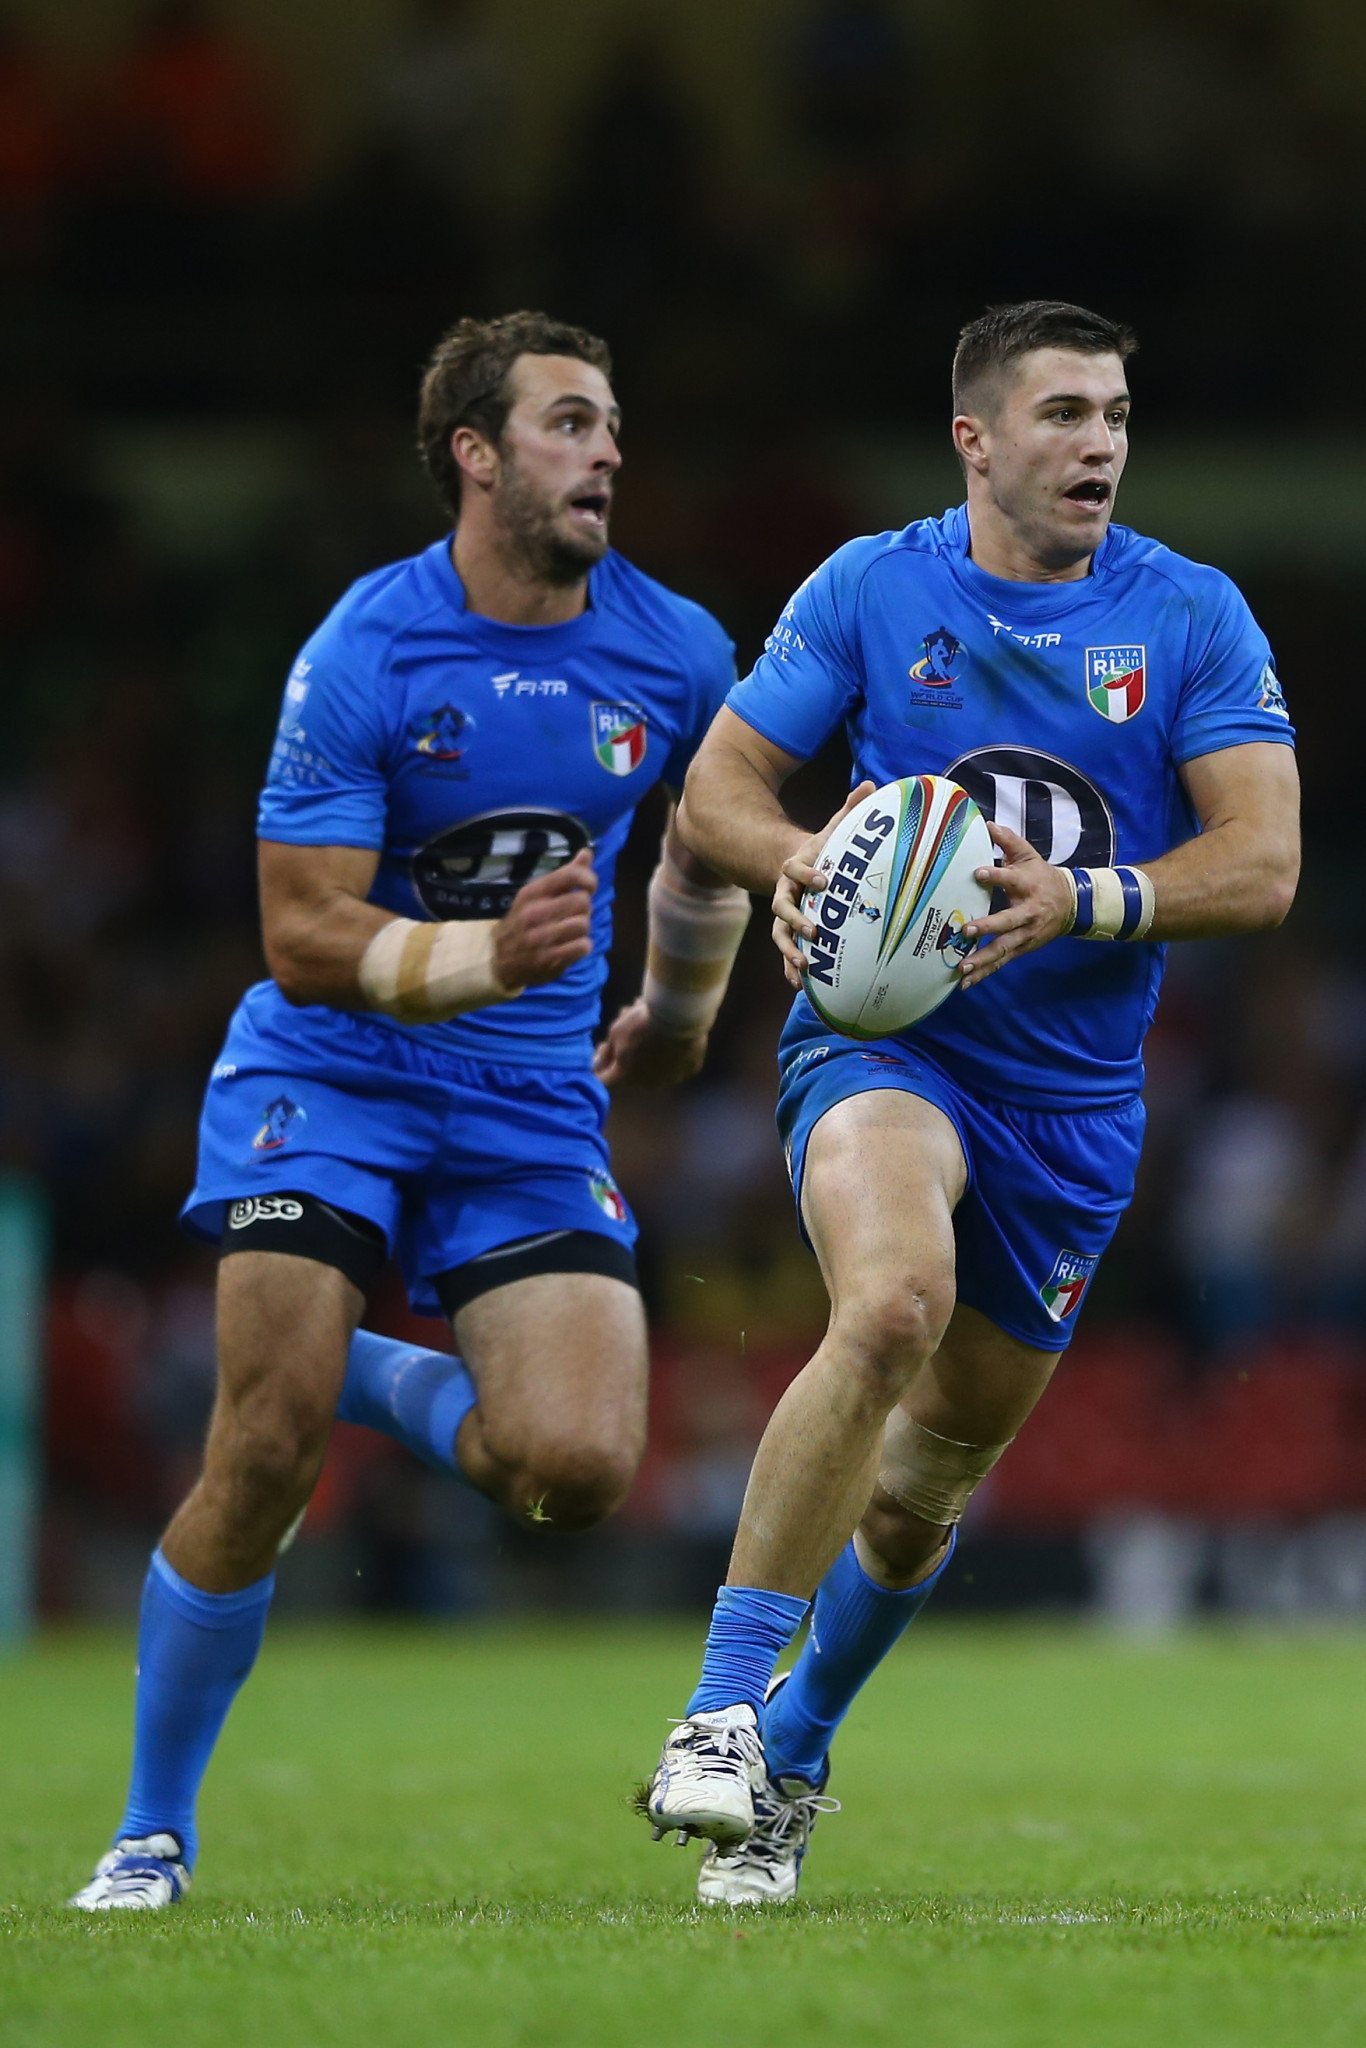 Italy made their Rugby League World Cup debut in 2013 ©Getty Images